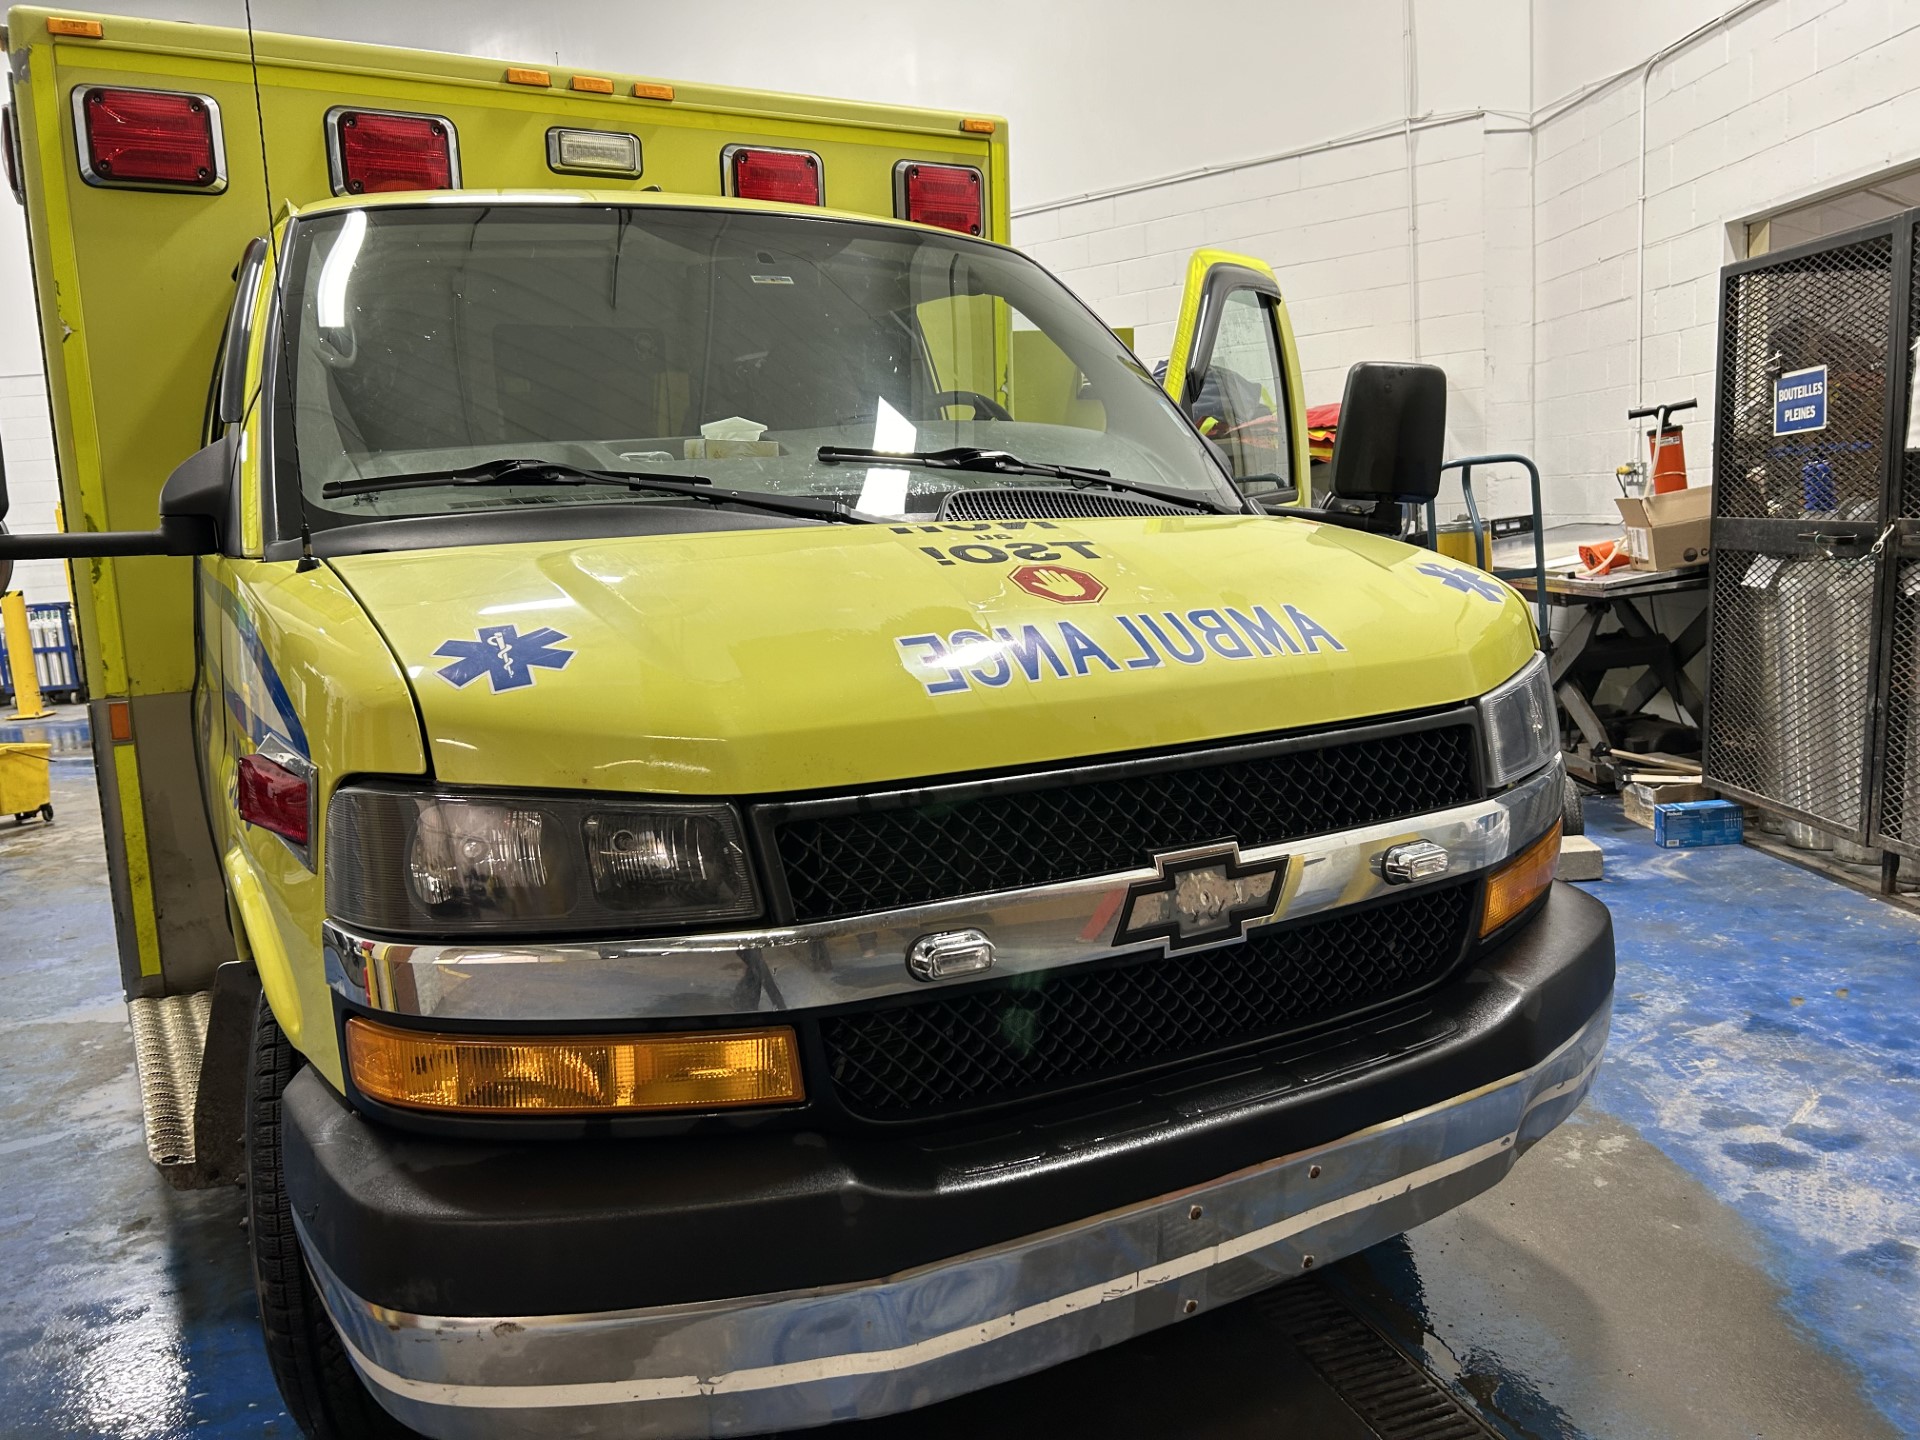 West Island ambulance response times higher than other areas in Montreal